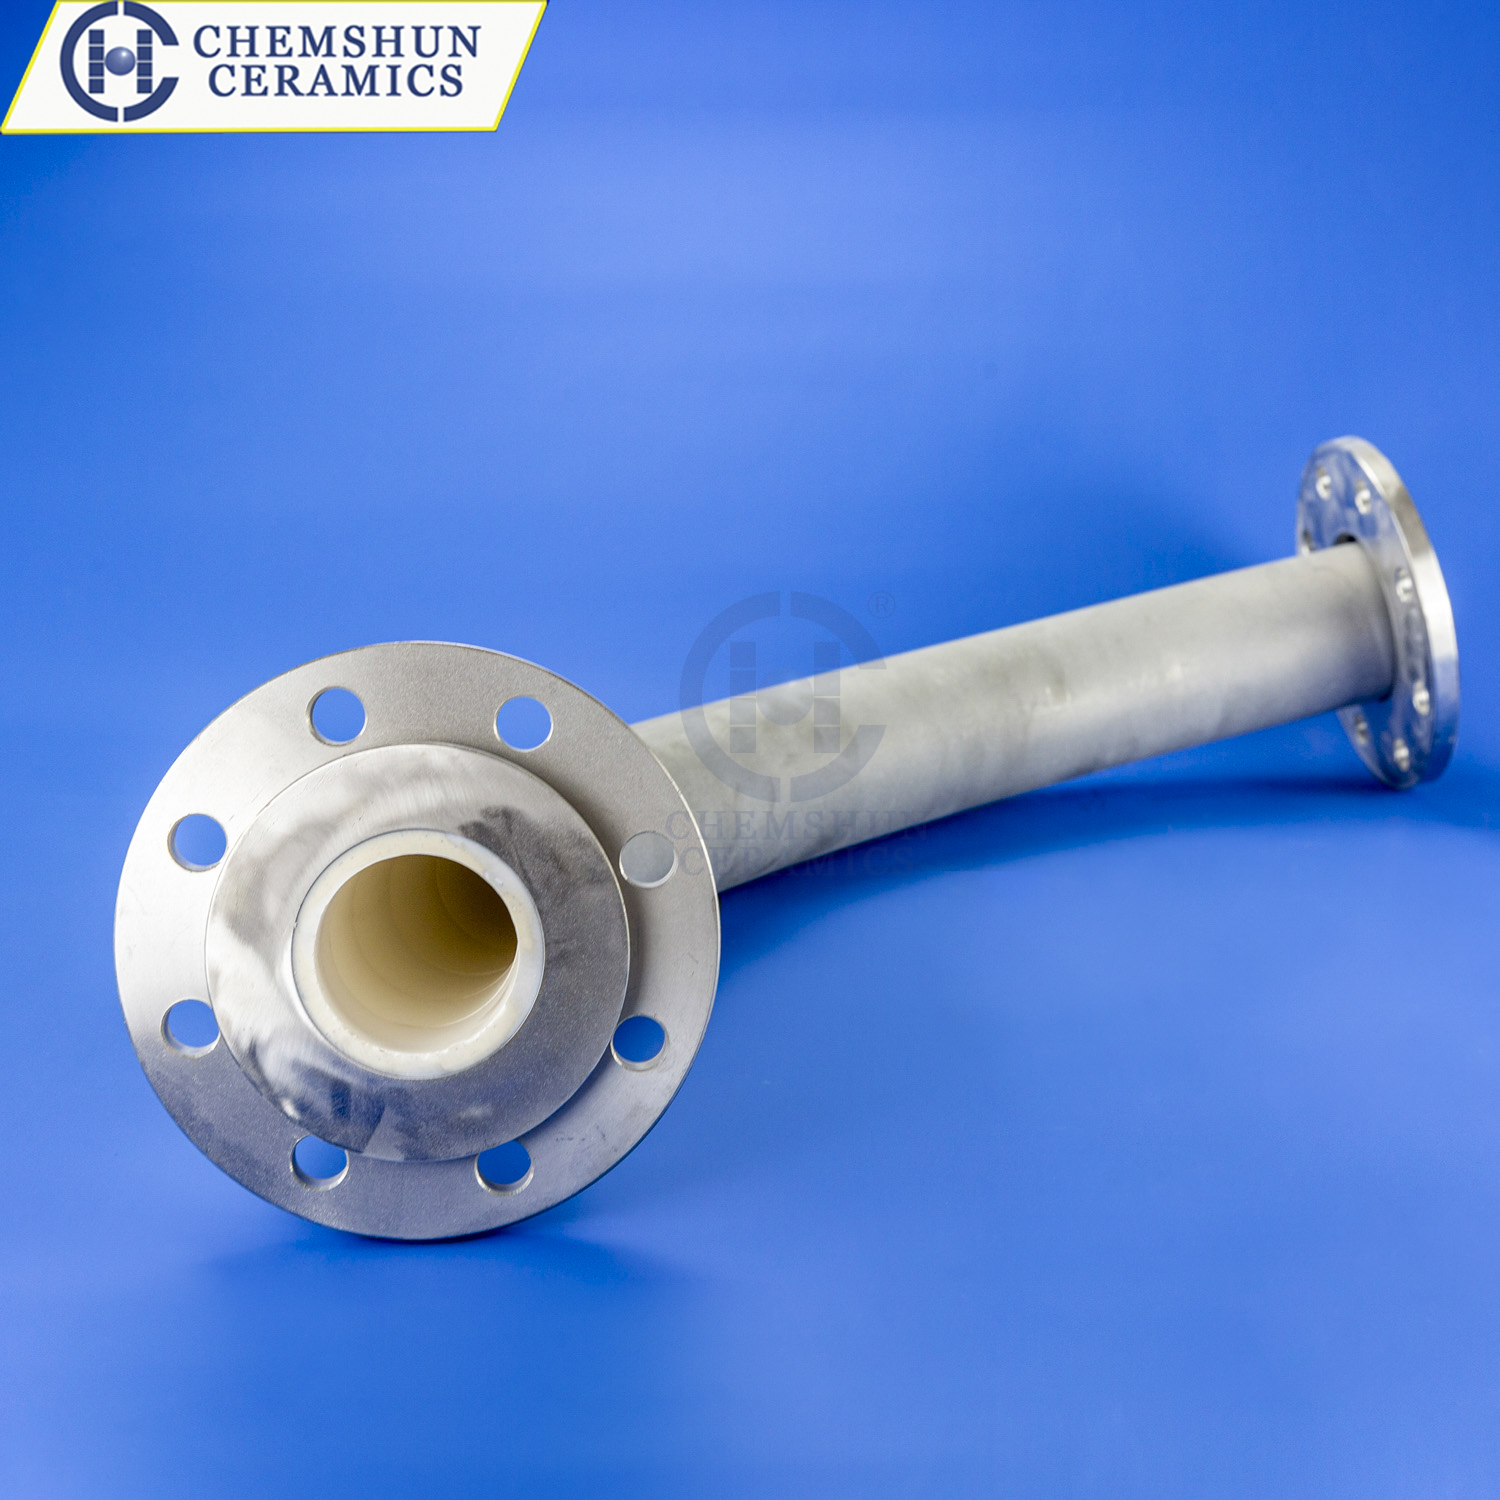 Wear-resistant ceramics professional to solve the wear problem of dust removal pipeline